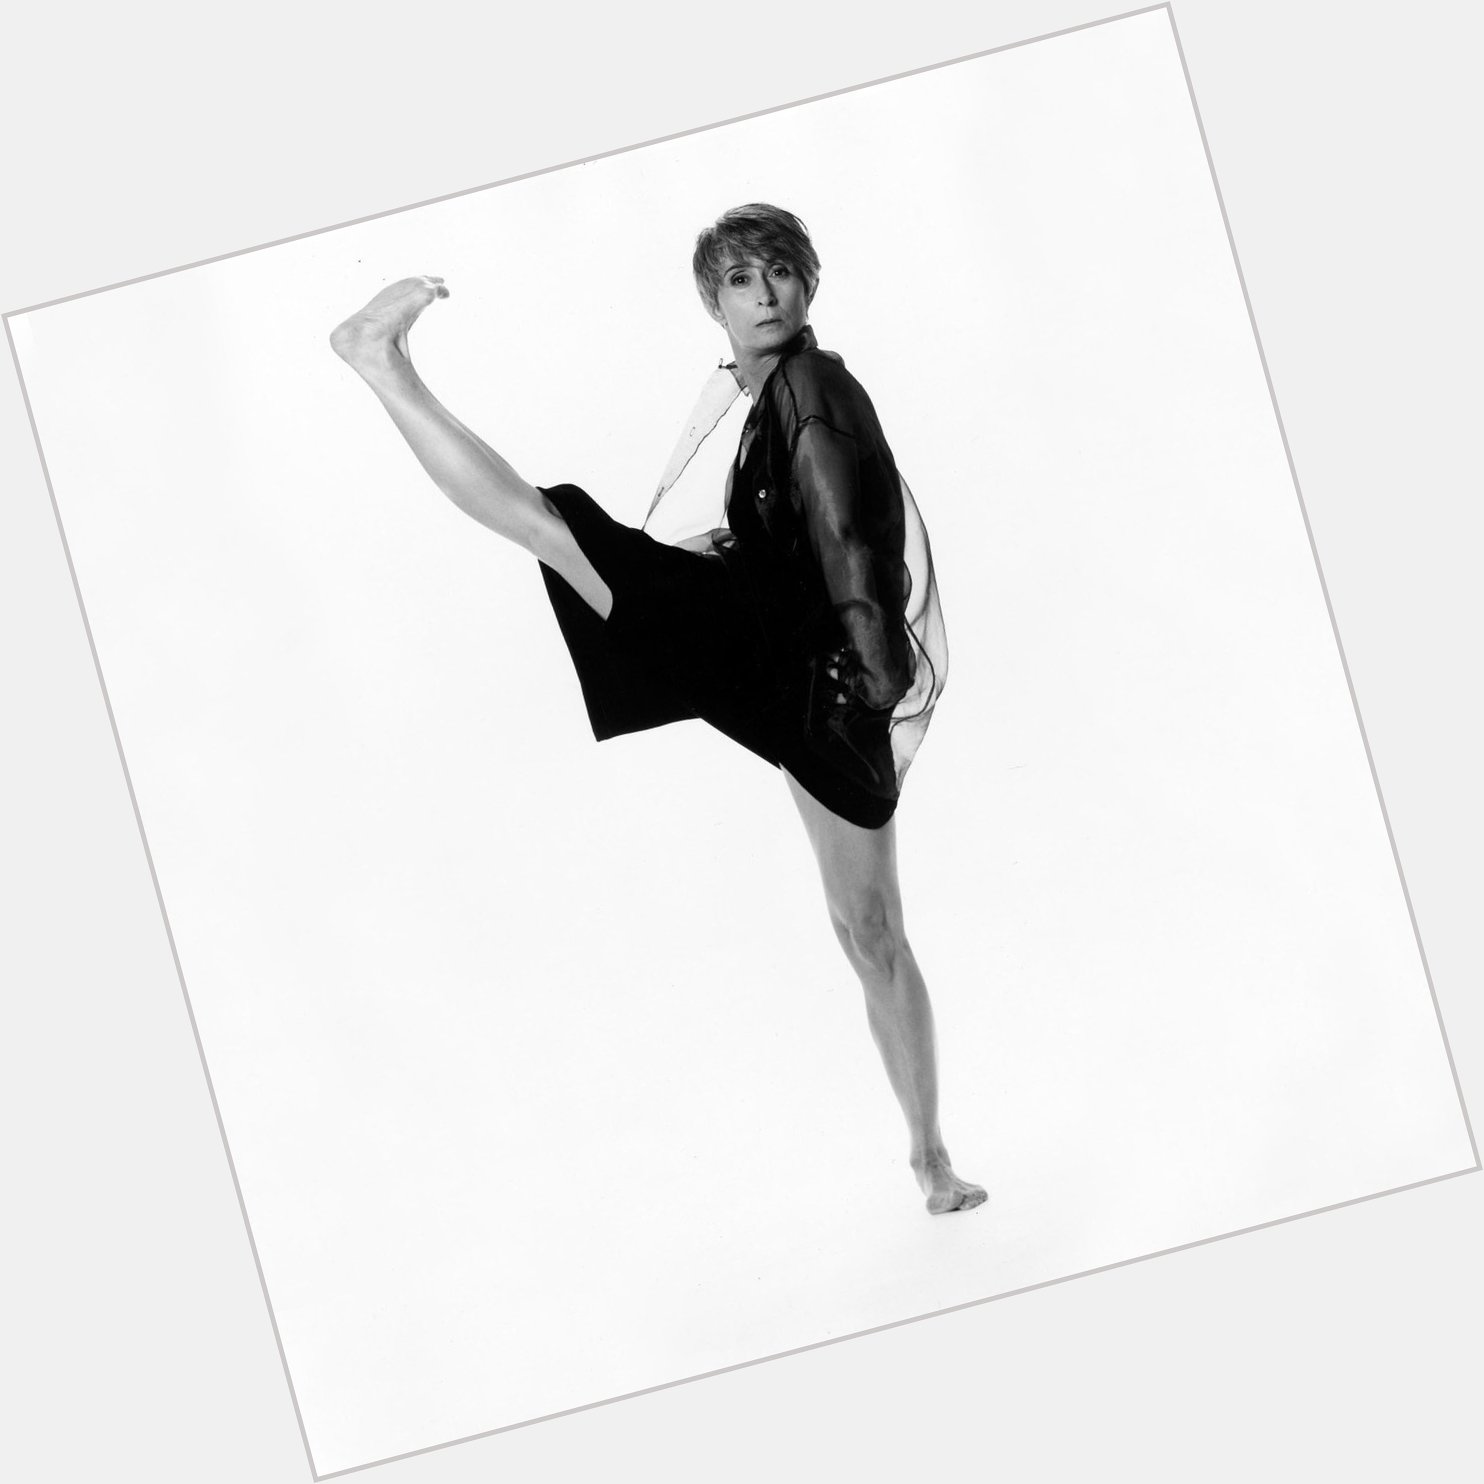 Happy Birthday Twyla Tharp! We cannot wait to celebrate your 50th Anniversary Tour this Nov!  